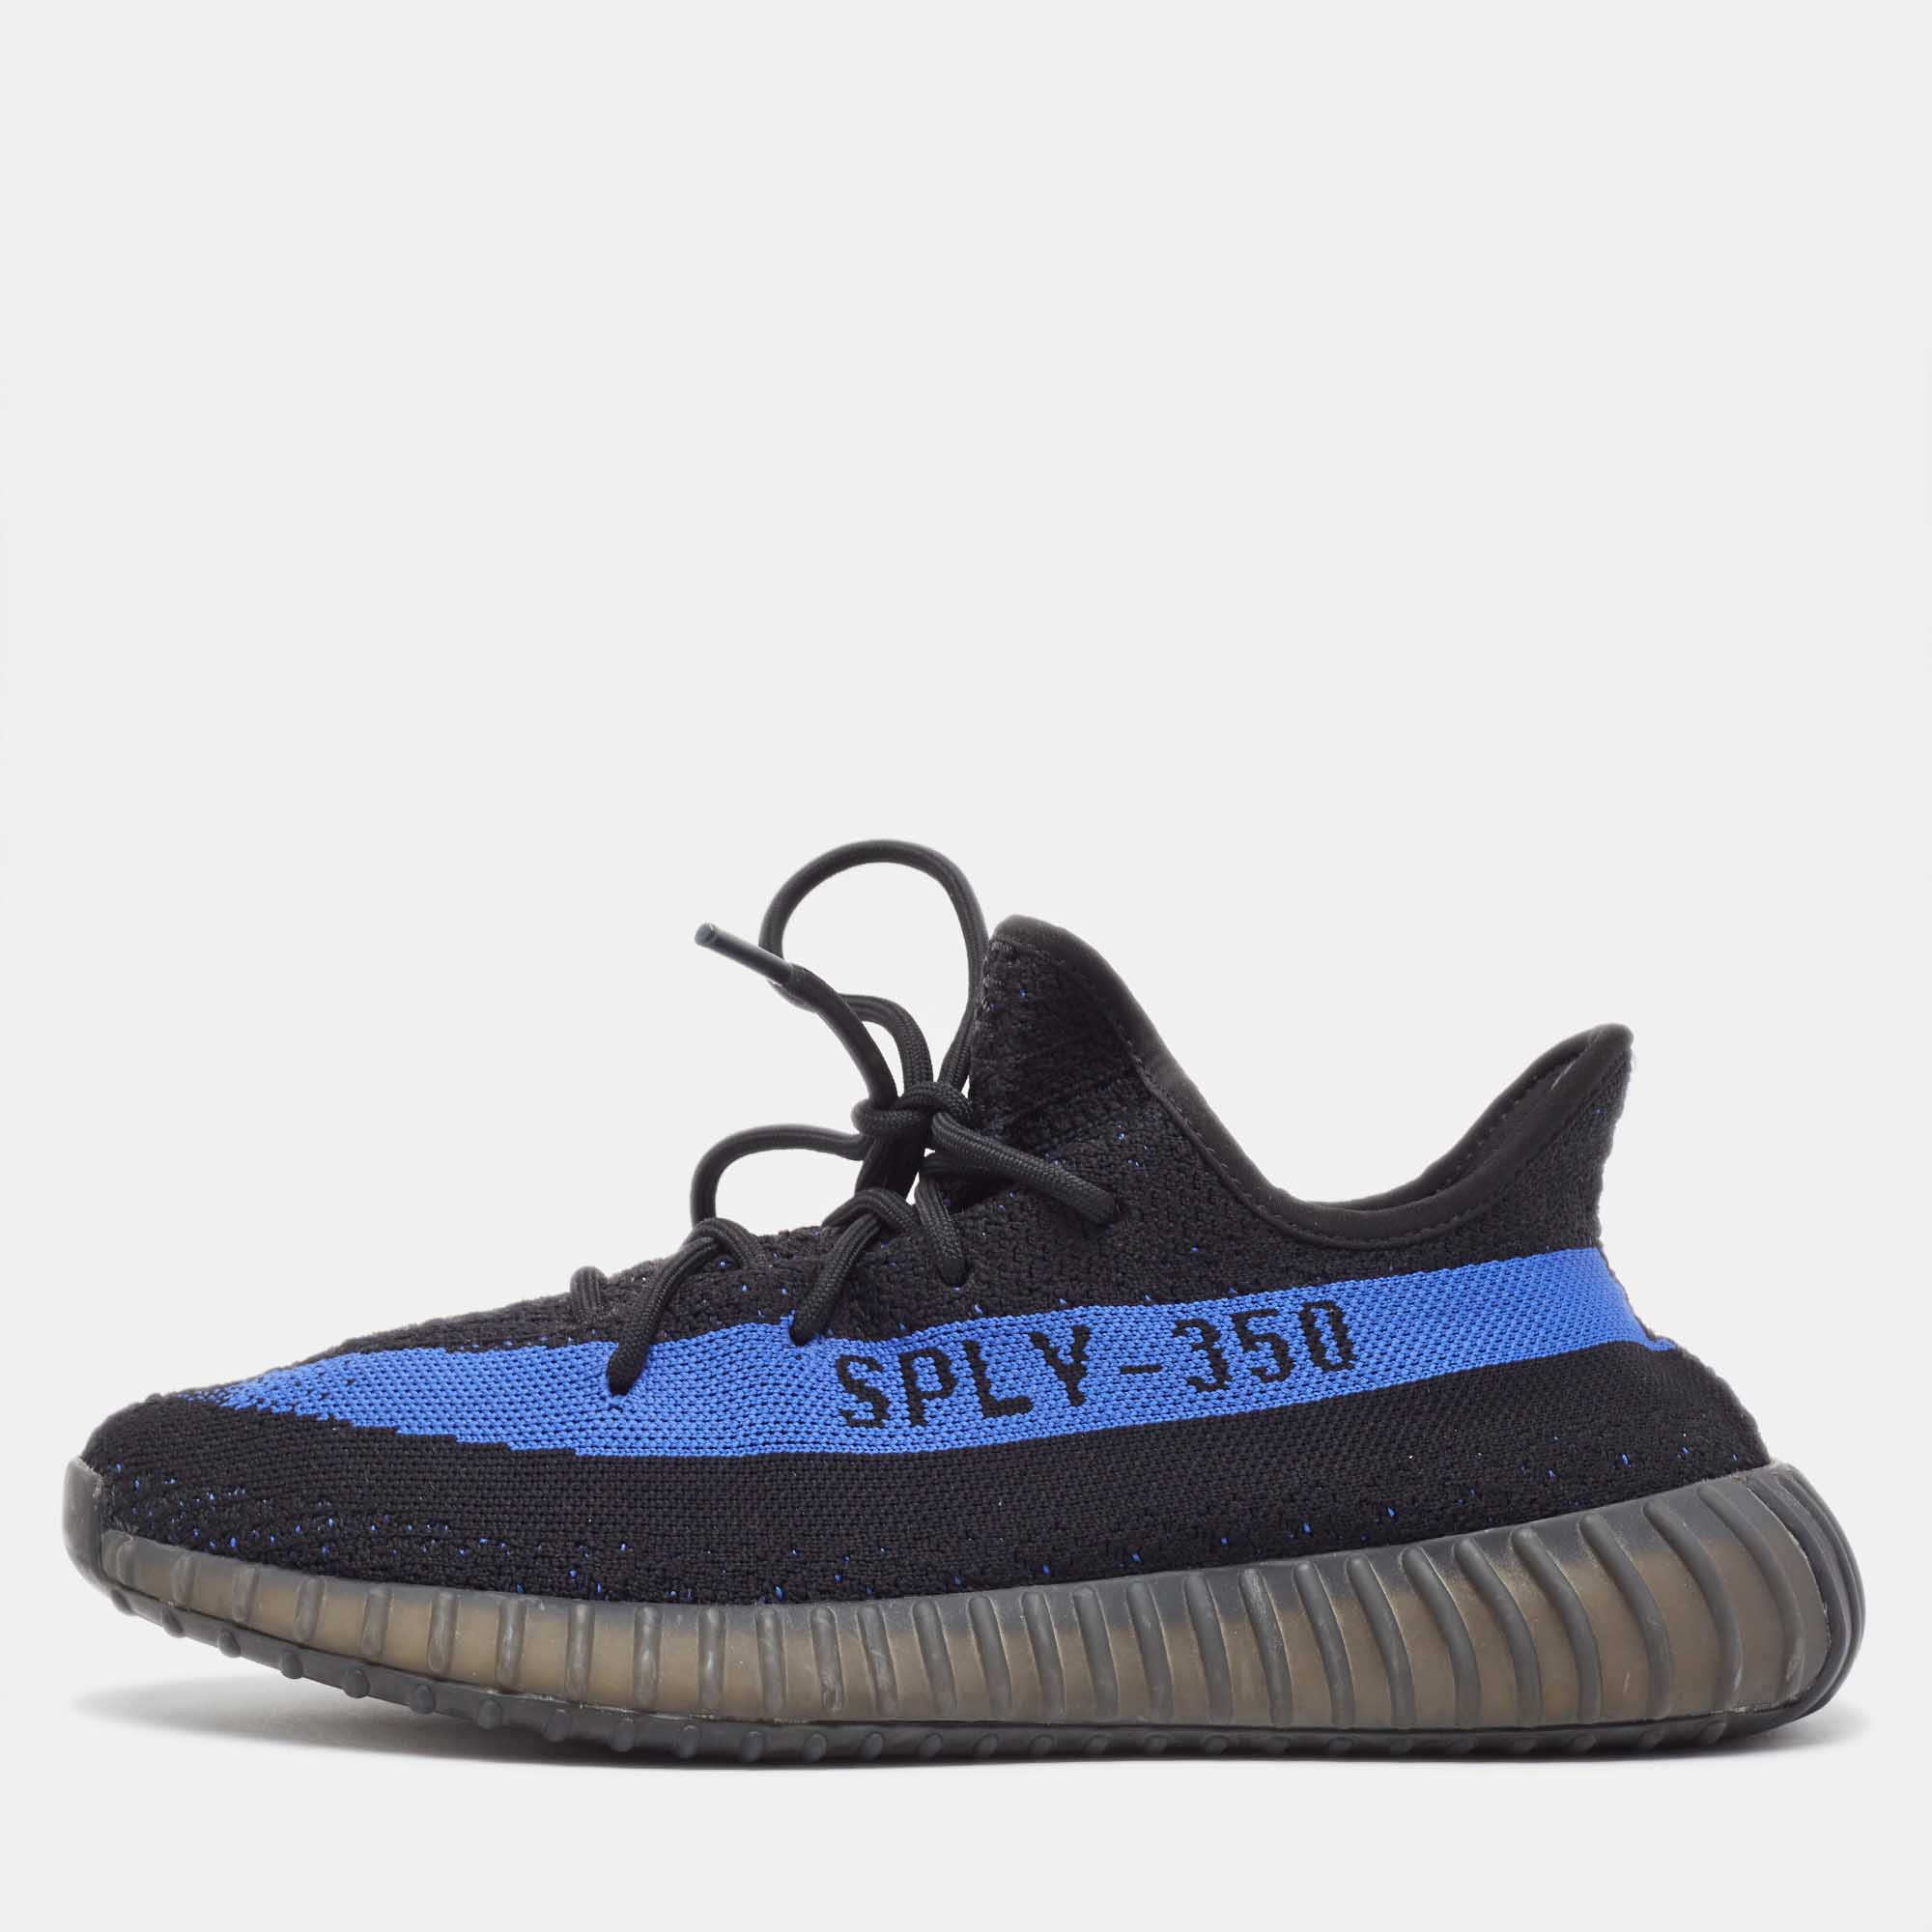 Yeezy x adidas black/blue knit fabric boost 350 v2vdazzling blue sneakers size 44 2/3